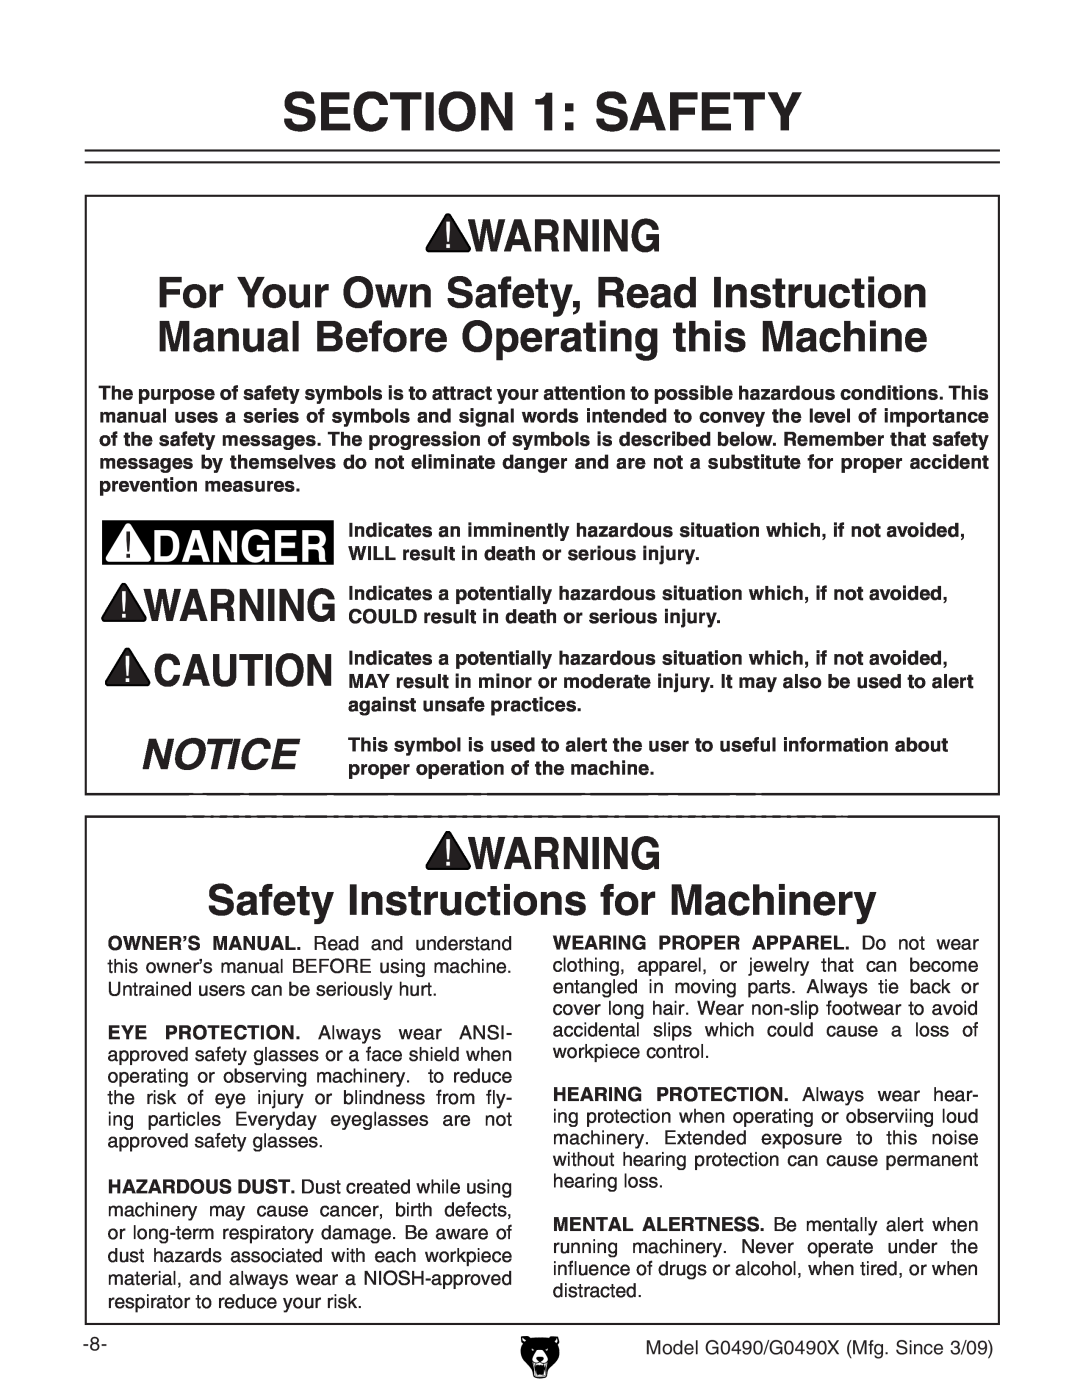 Grizzly G0490 Safety Instructions for Machinery, Indicates an imminently hazardous situation which, if not avoided 